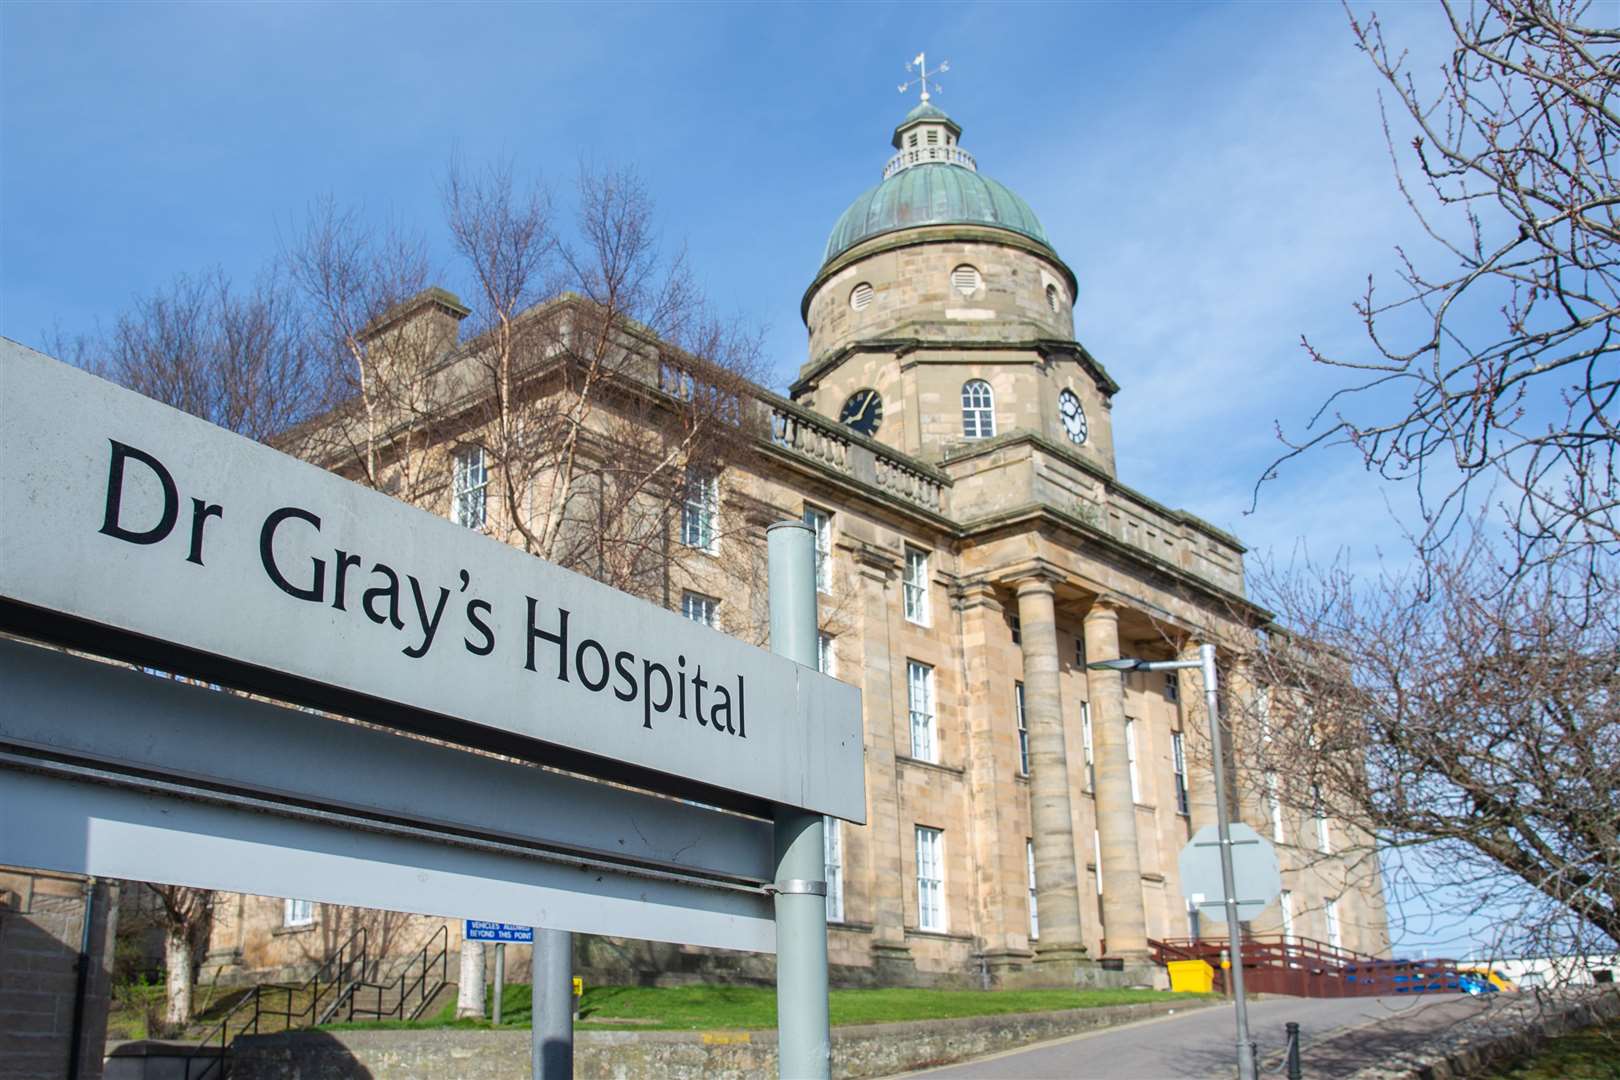 Maternity services at Dr Gray's Hospital in Elgin were downgraded in 2018. Picture: Daniel Forsyth